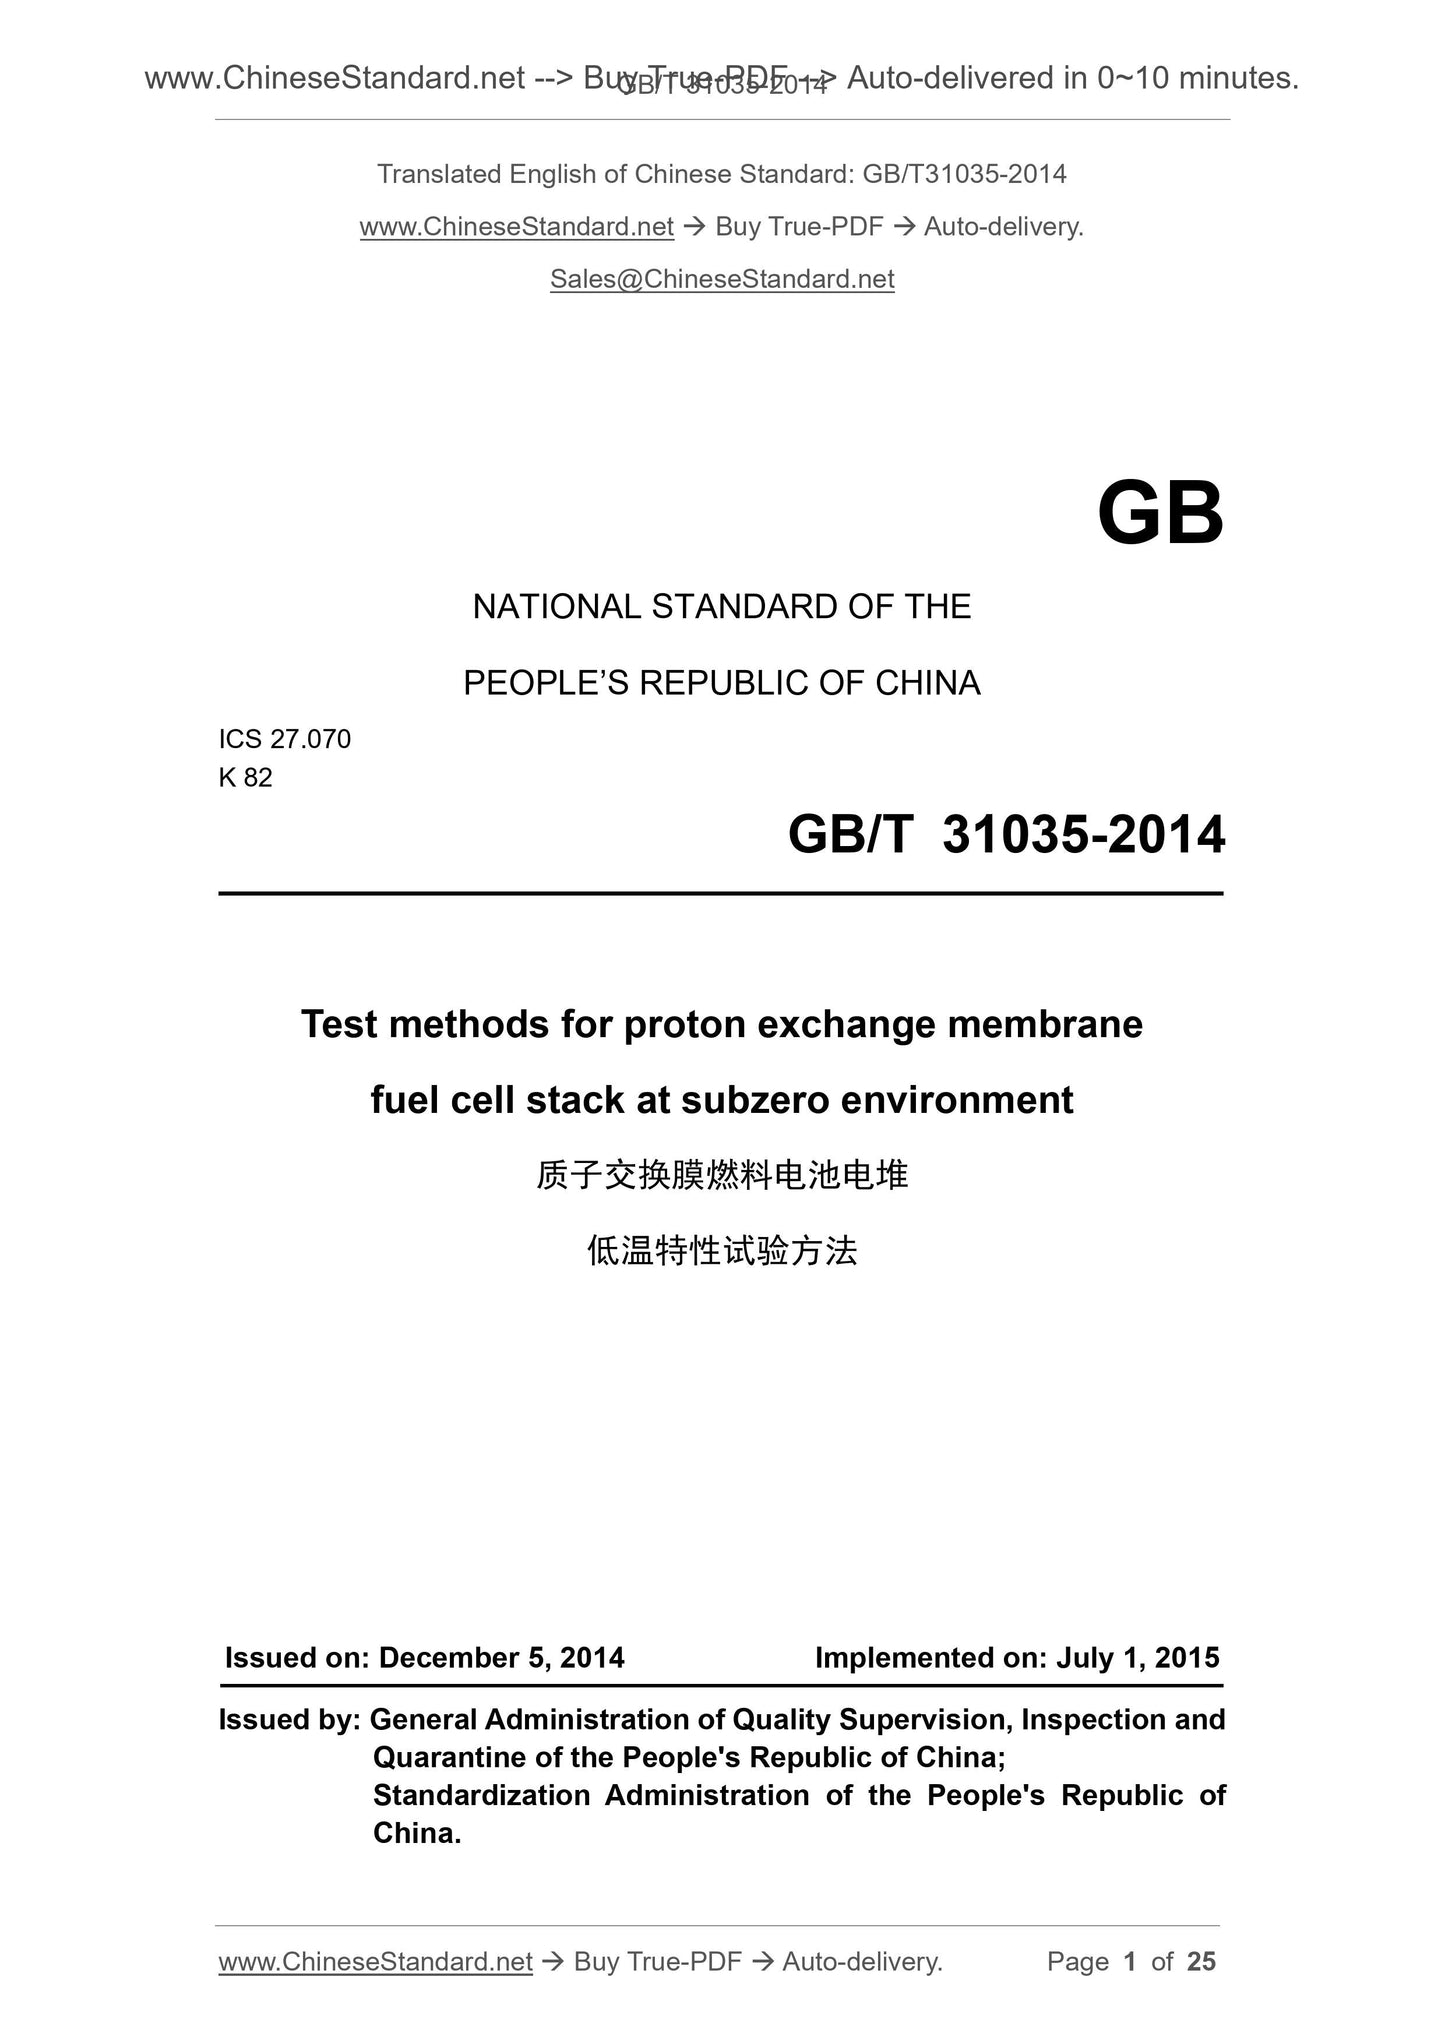 GB/T 31035-2014 Page 1